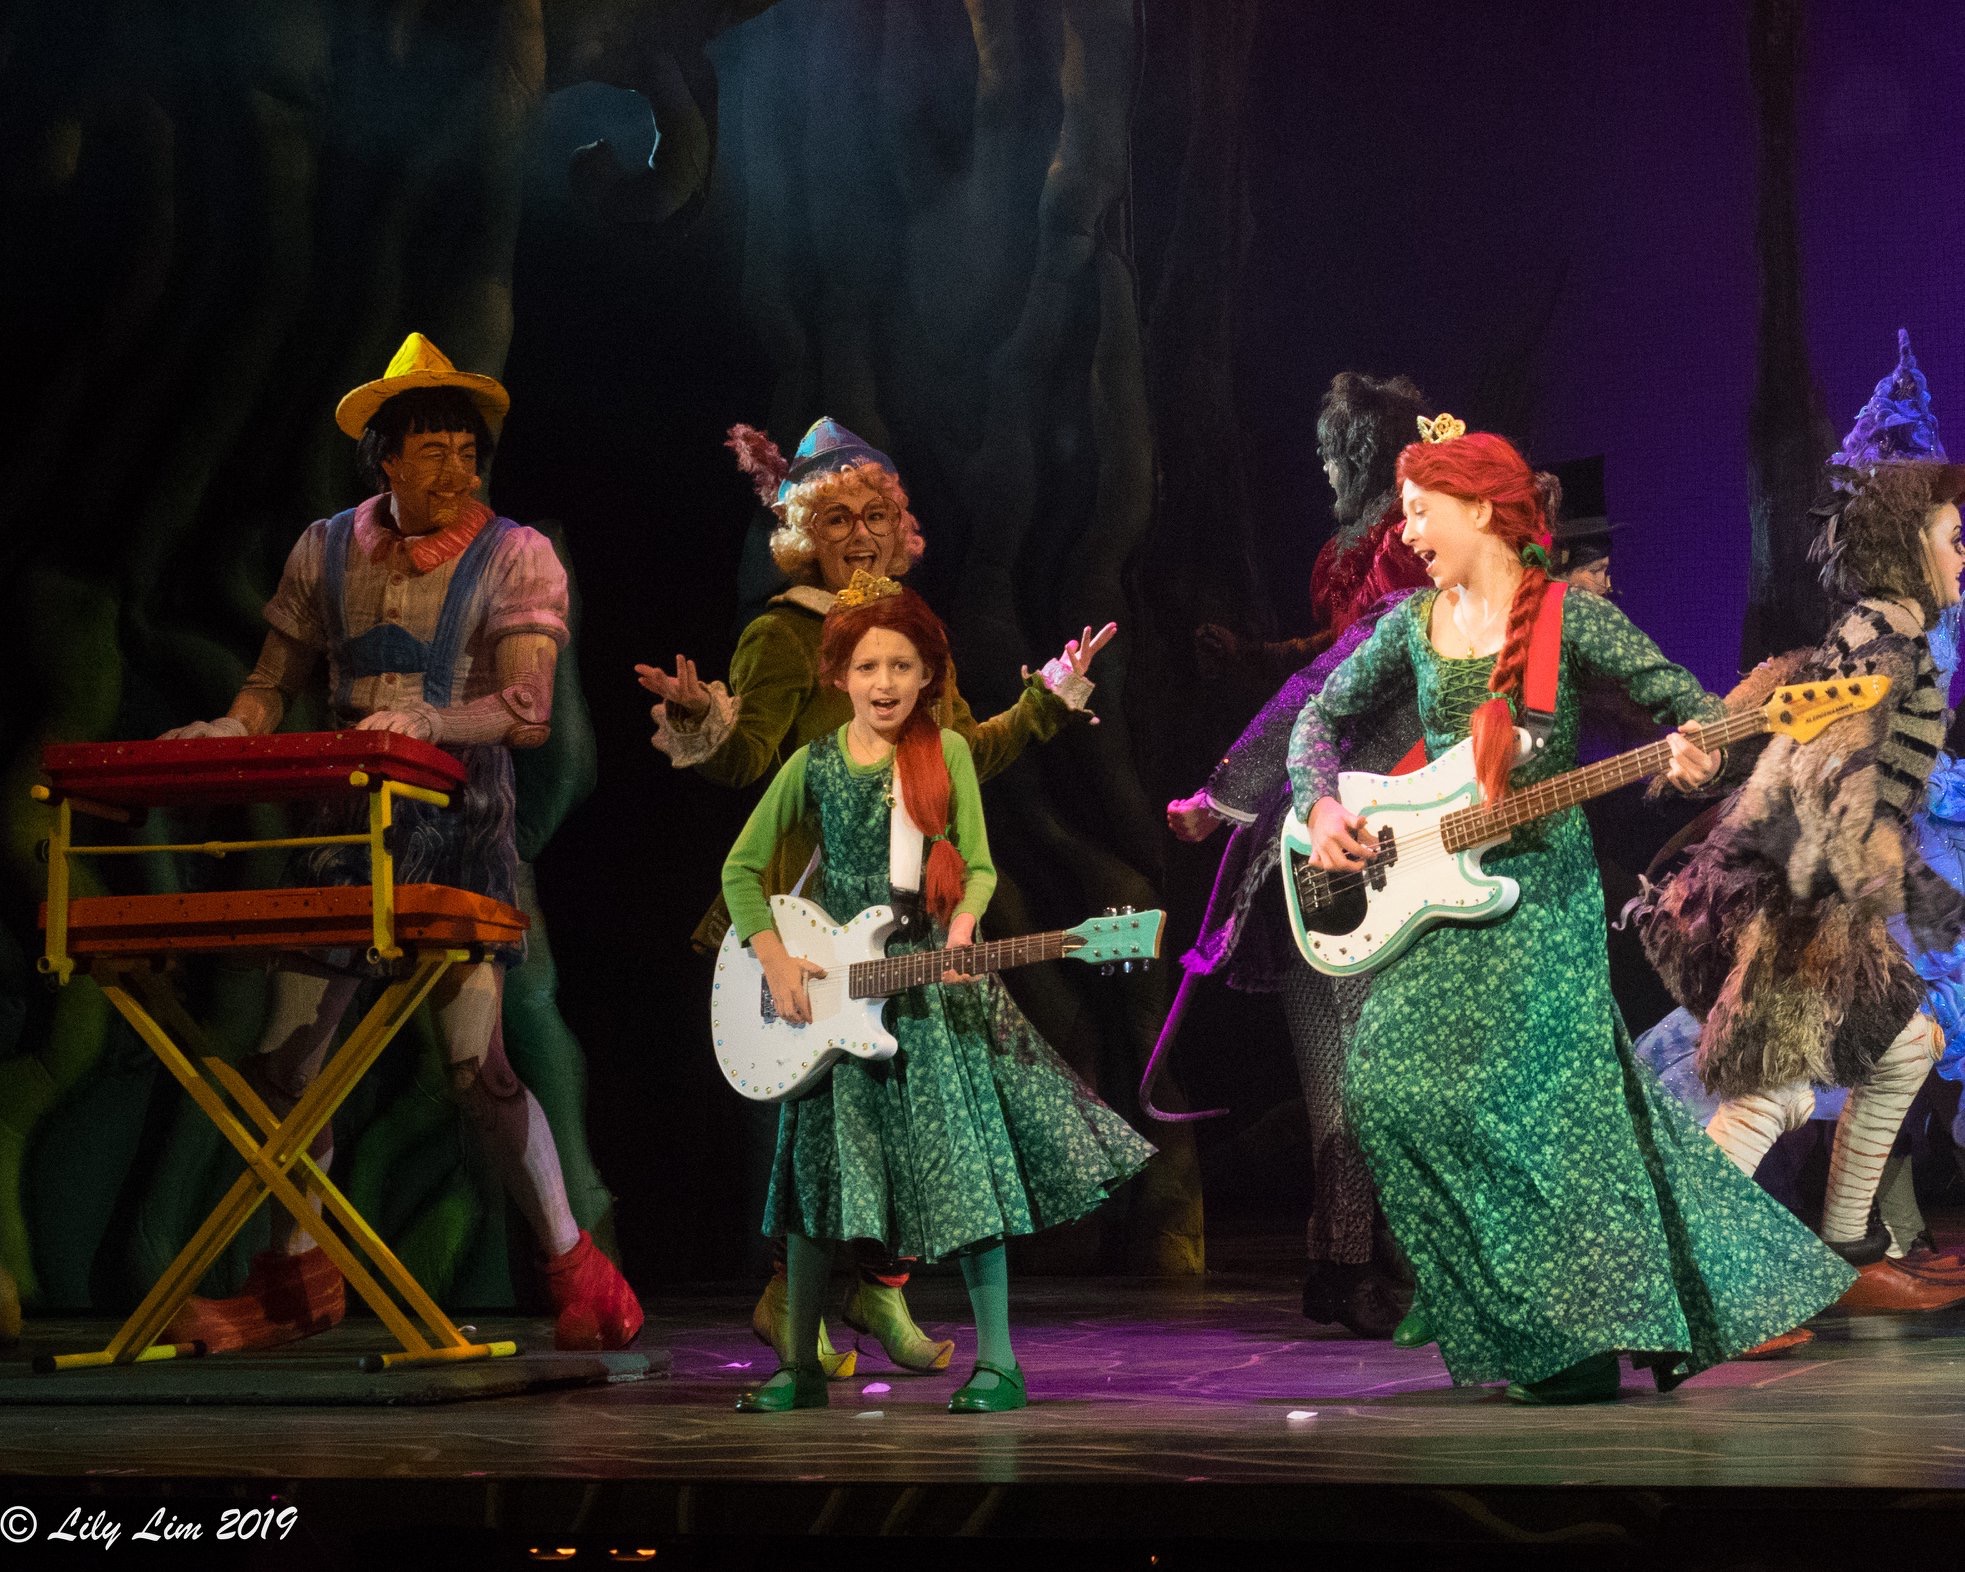 Noelle Lidyoff performed in Shrek as young Fiona at Cerritos Performing Arts Center in 2019. Photo by Lily Lim for 3D Theatricals.